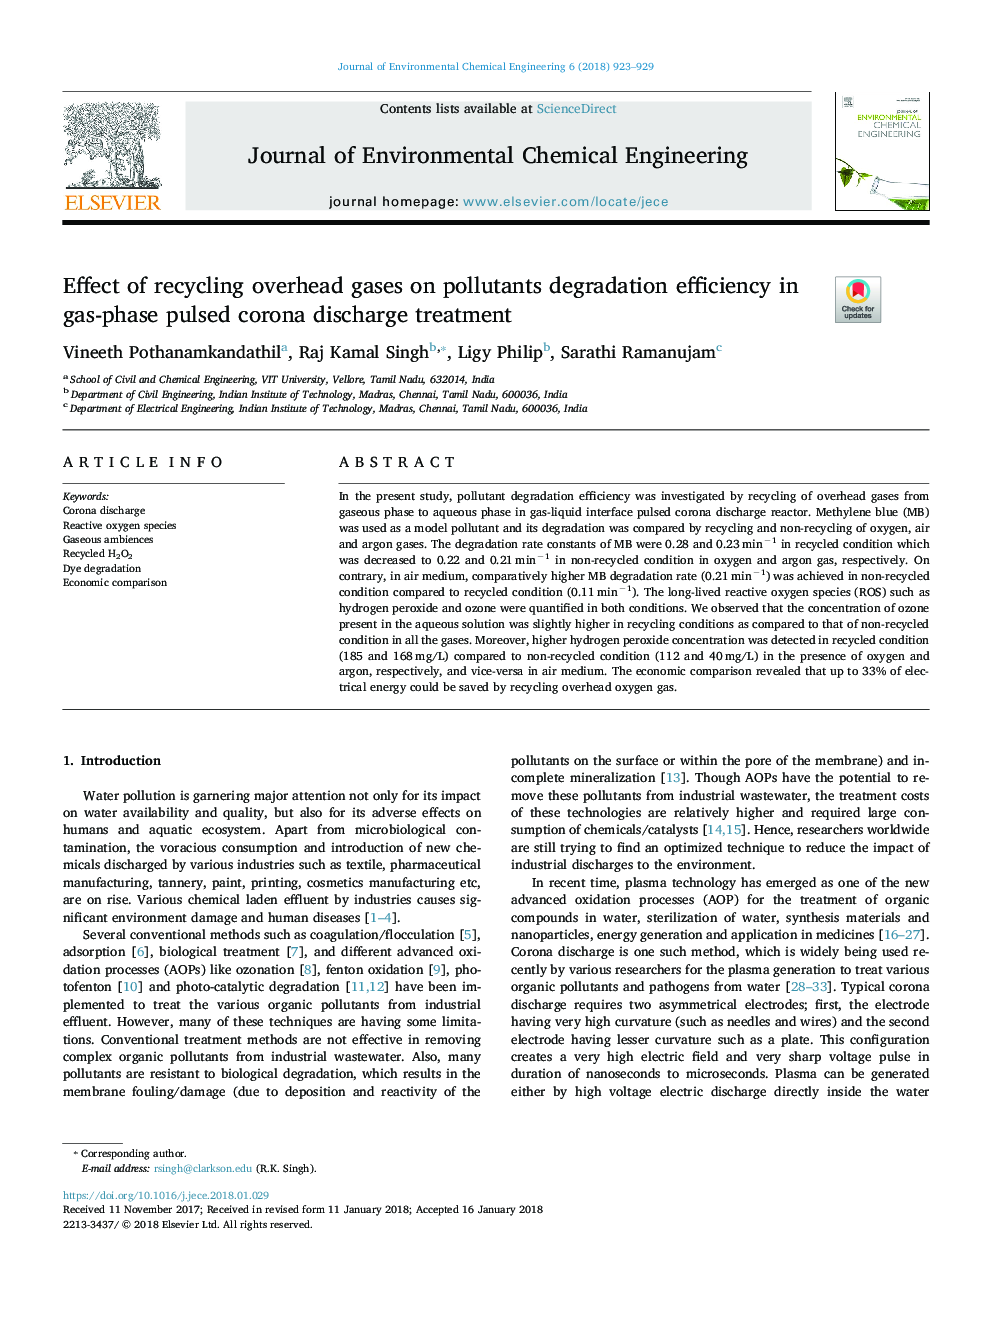 Effect of recycling overhead gases on pollutants degradation efficiency in gas-phase pulsed corona discharge treatment